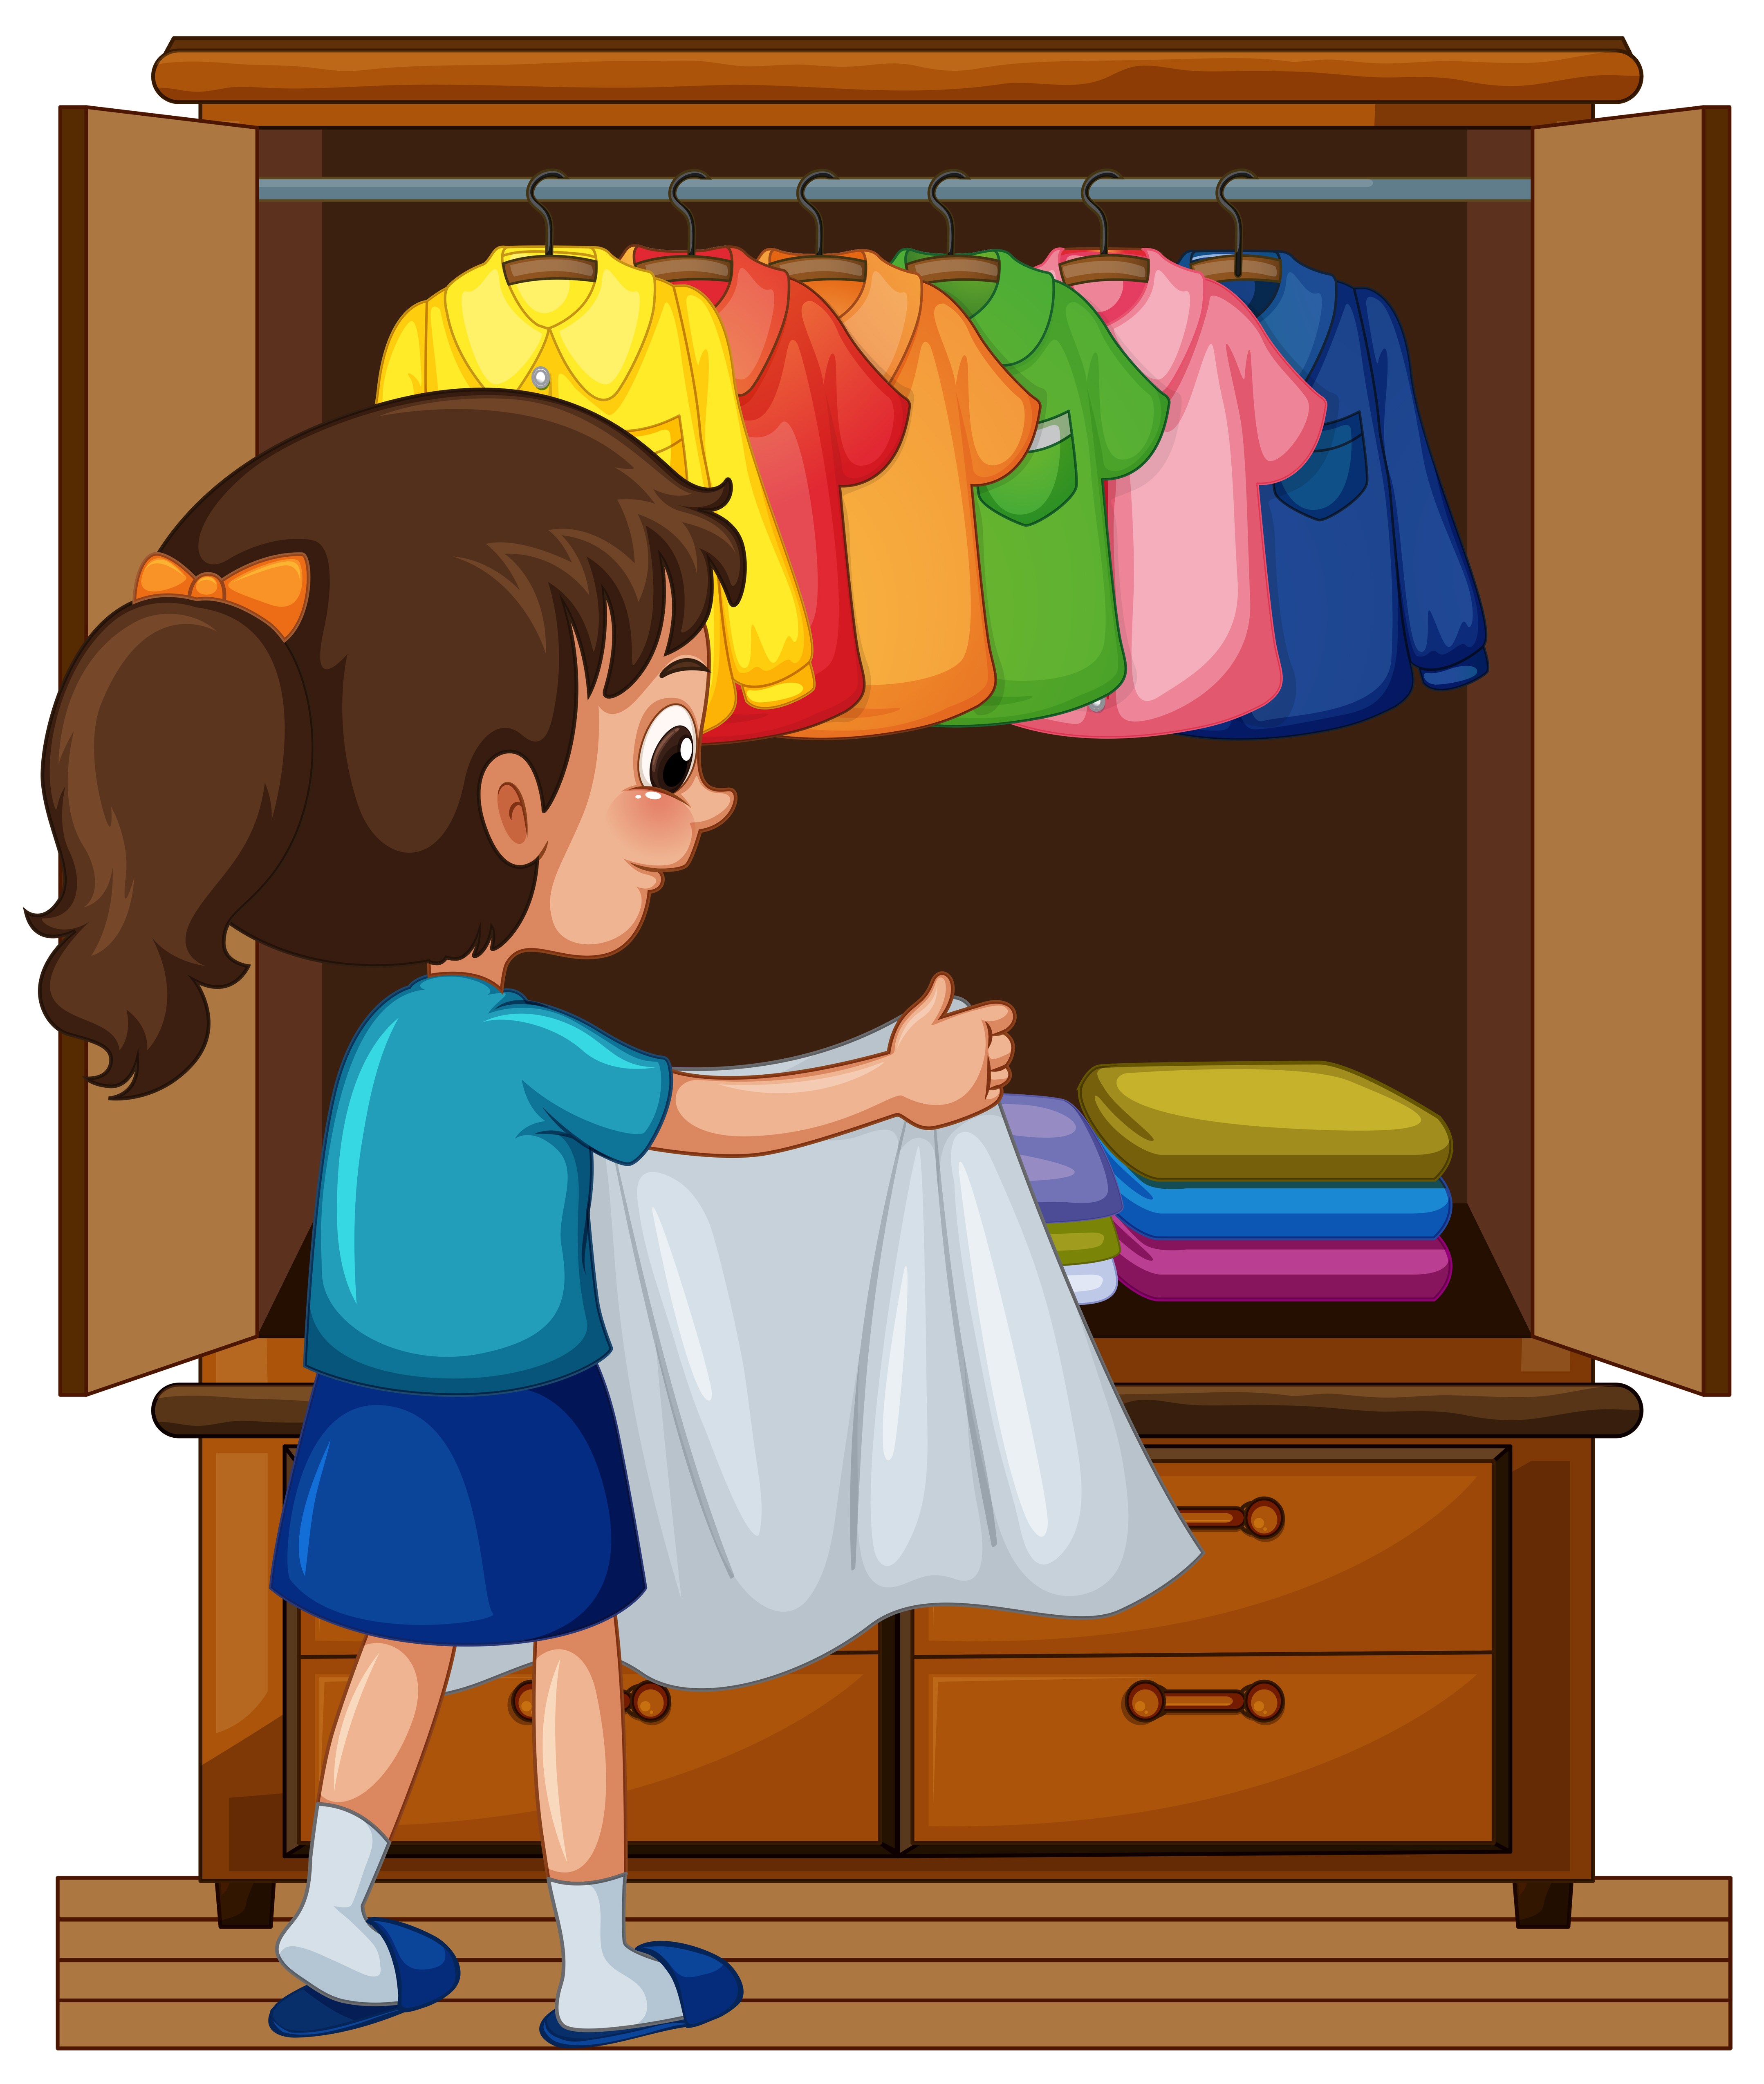 Download the Girl putting away clothes in closet 374098